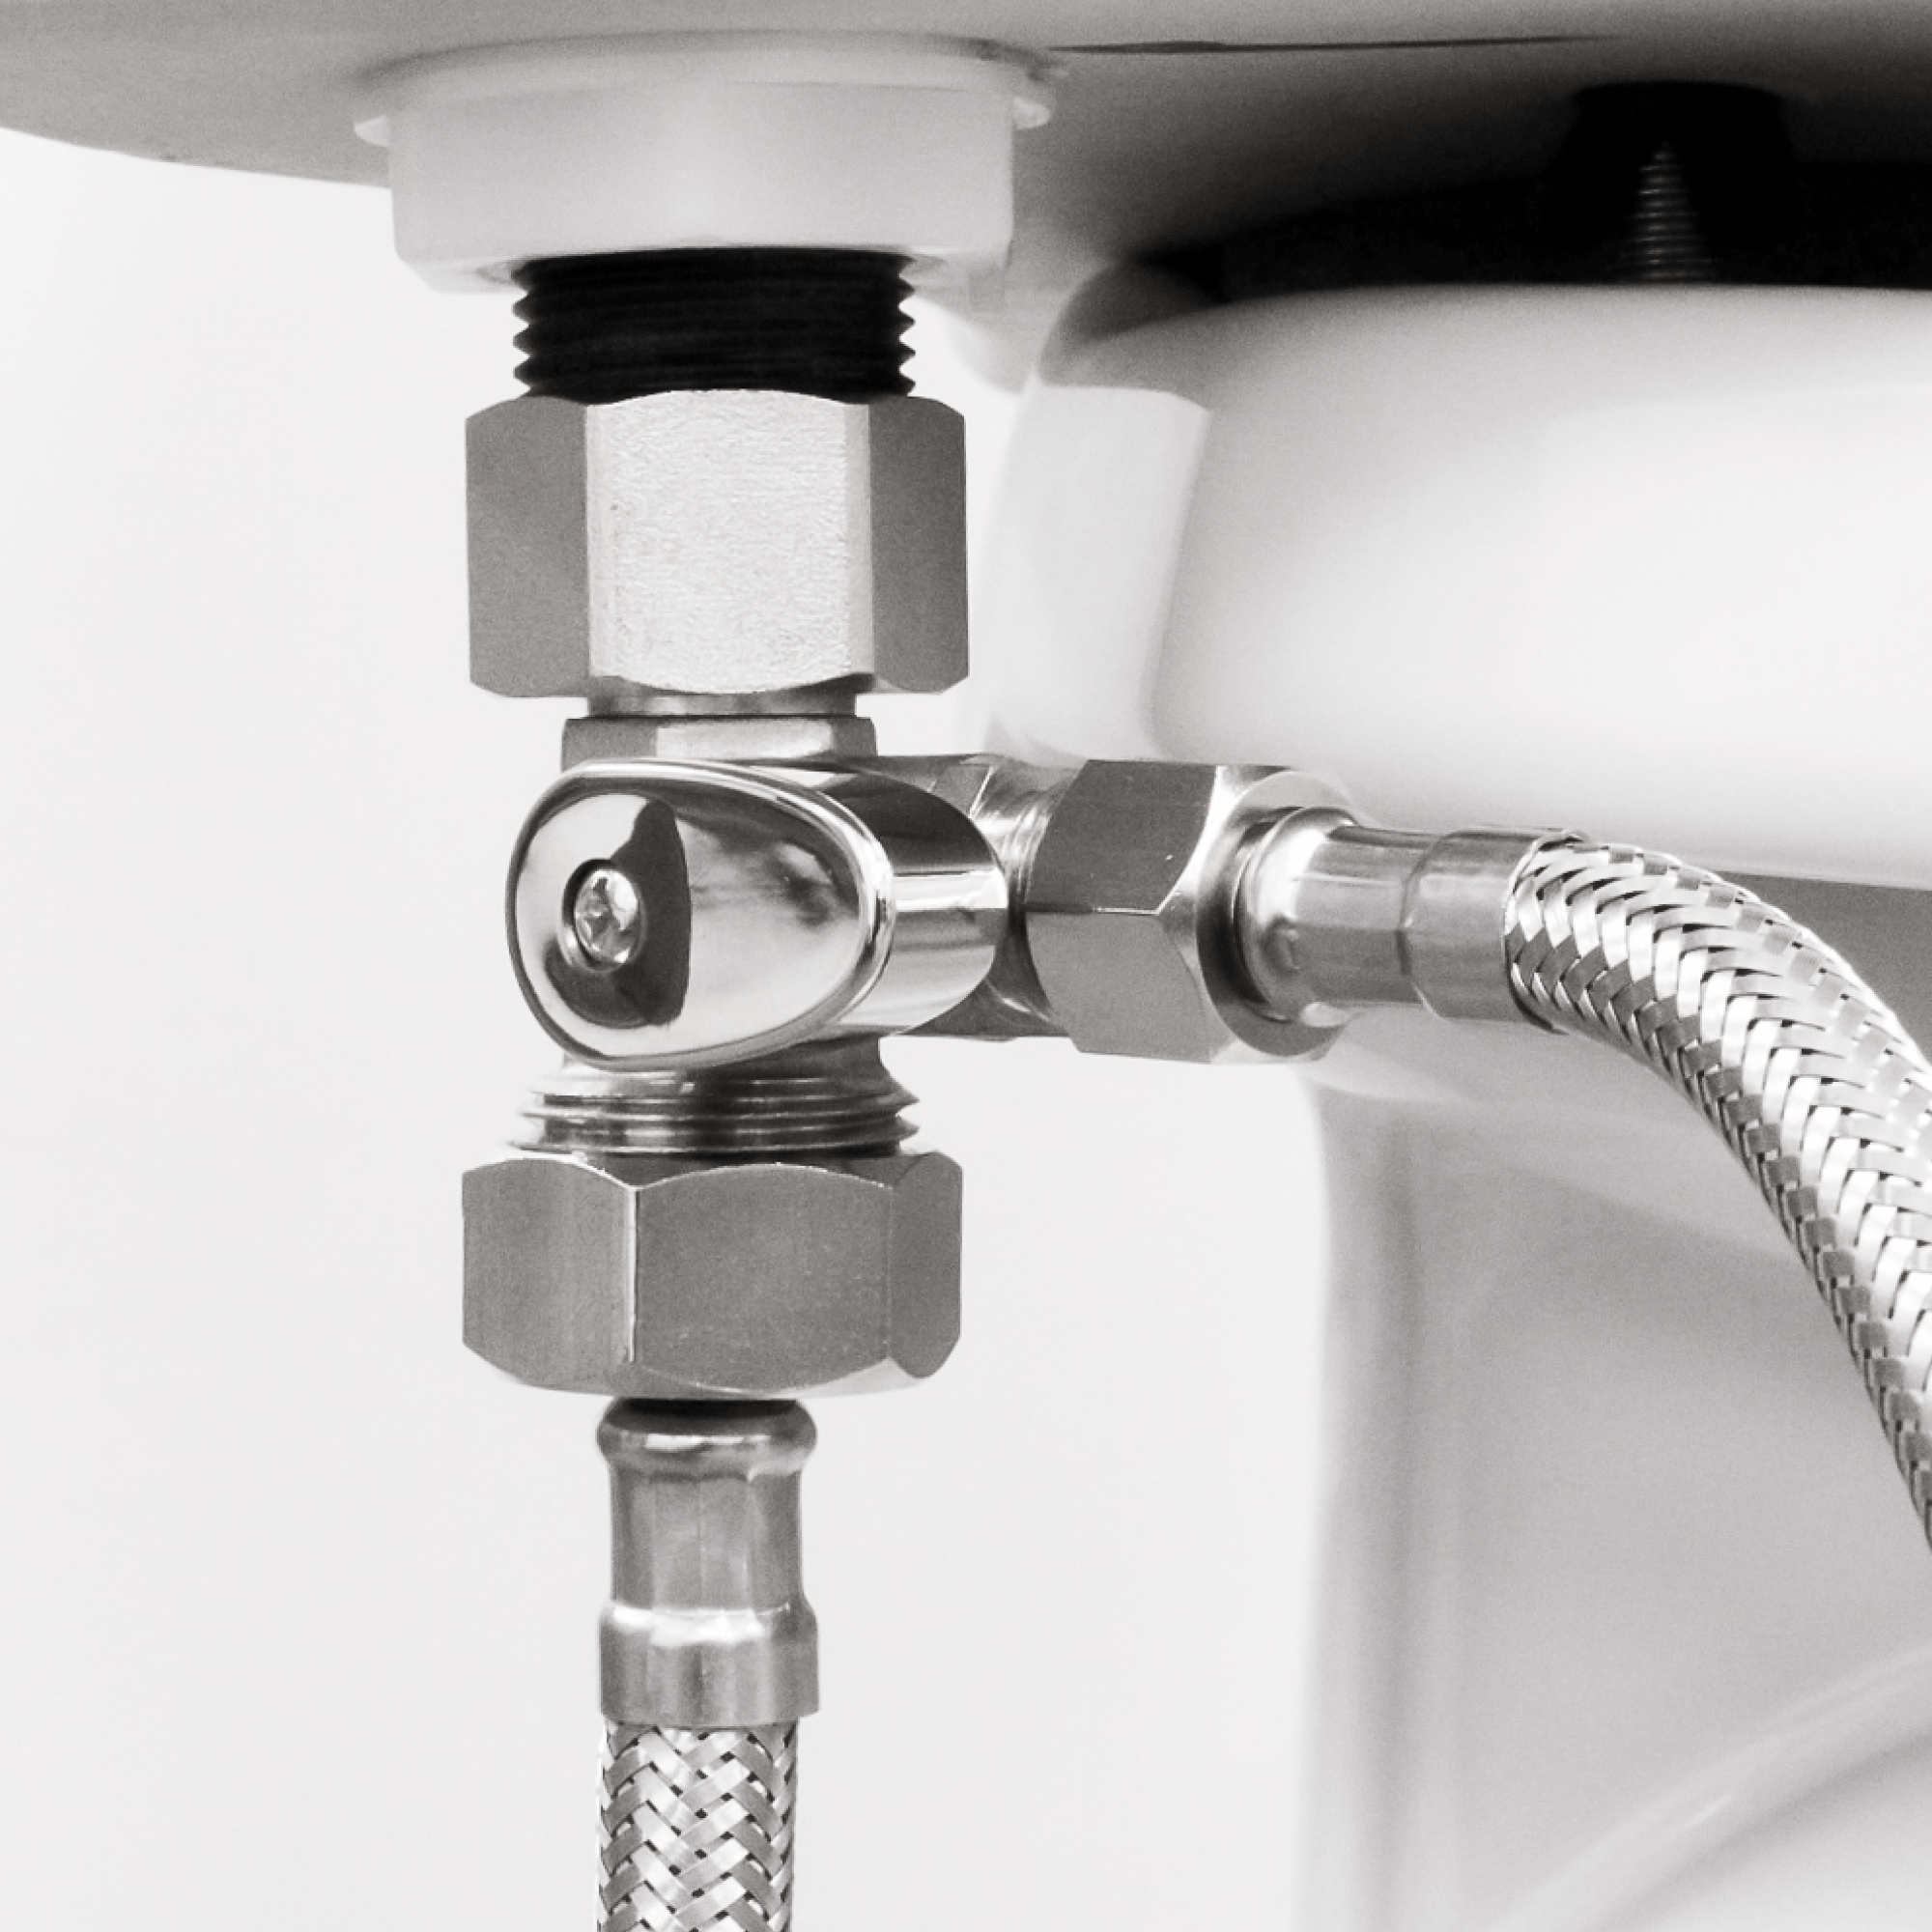 Cold Water Teardrop Nickel Shut-Off T-Adapter for NEO series installed, in the on position